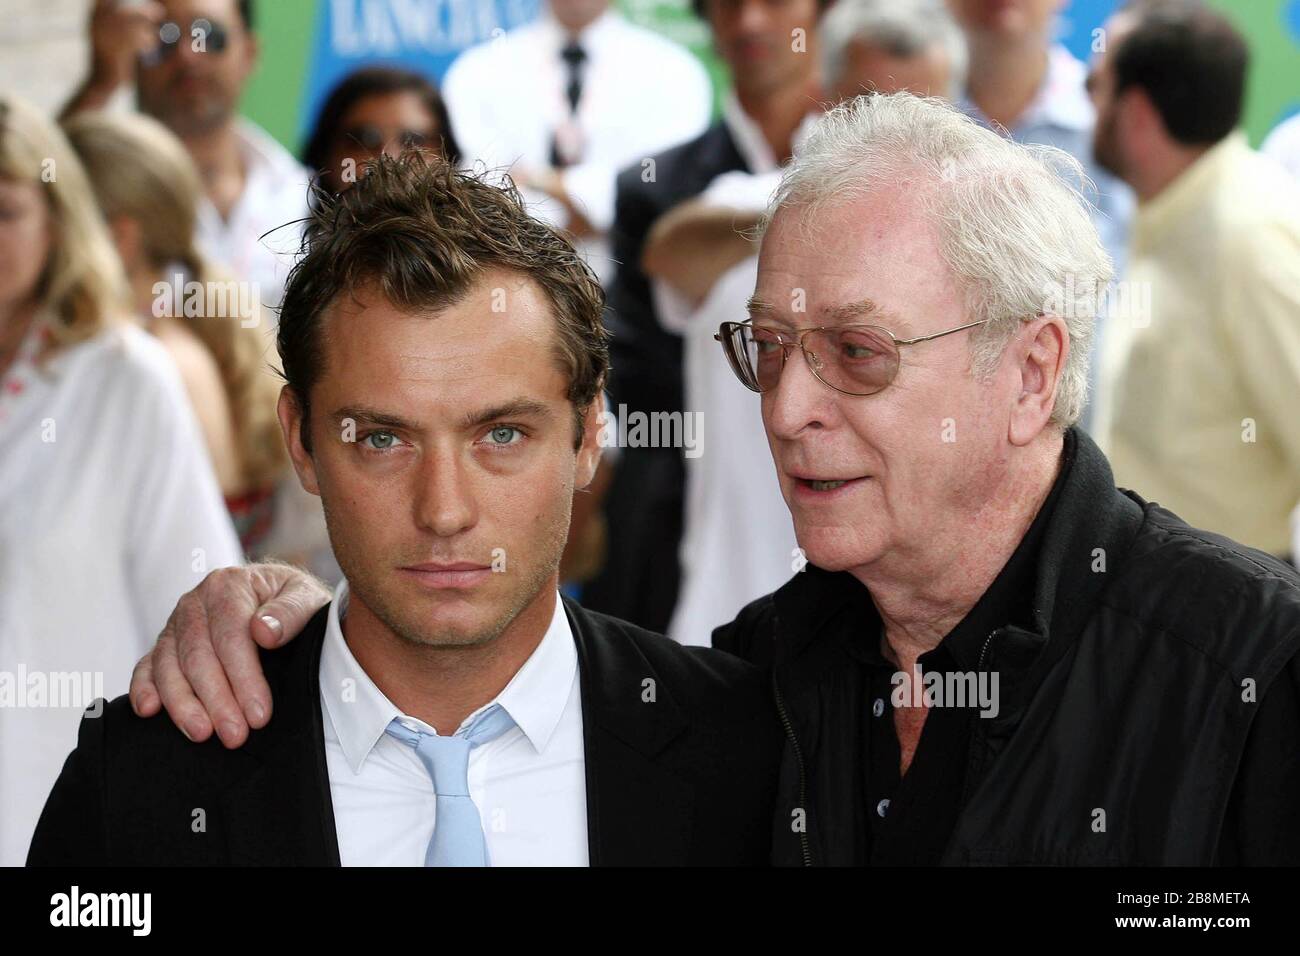 Venice, 30 /08/2007. Jude Law and Michael Caine arrive in Venice Lido to attend the press conference of the film "Sleuth". Stock Photo